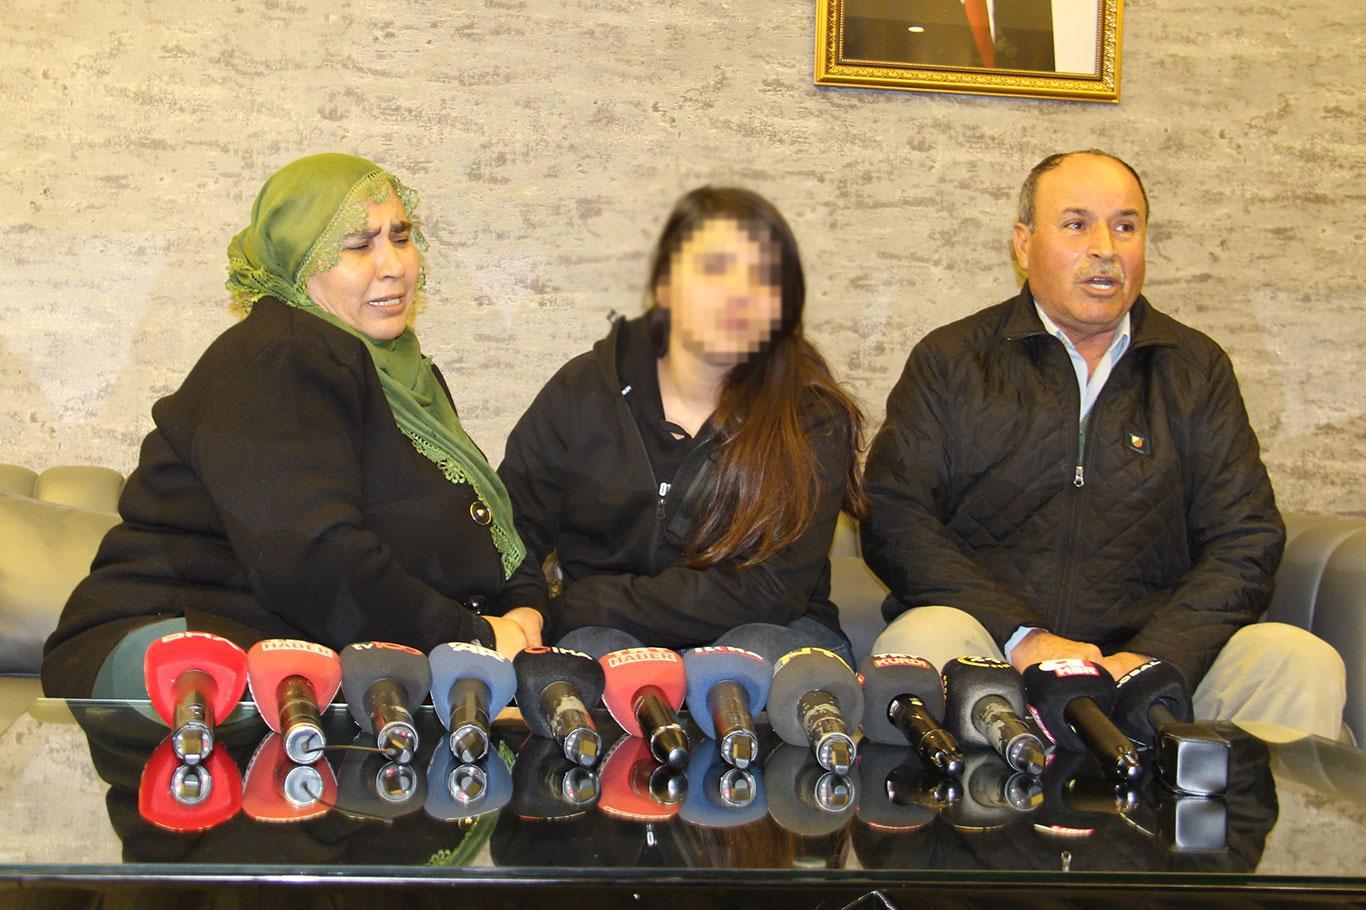 One more YPG/PKK member reunites with her family